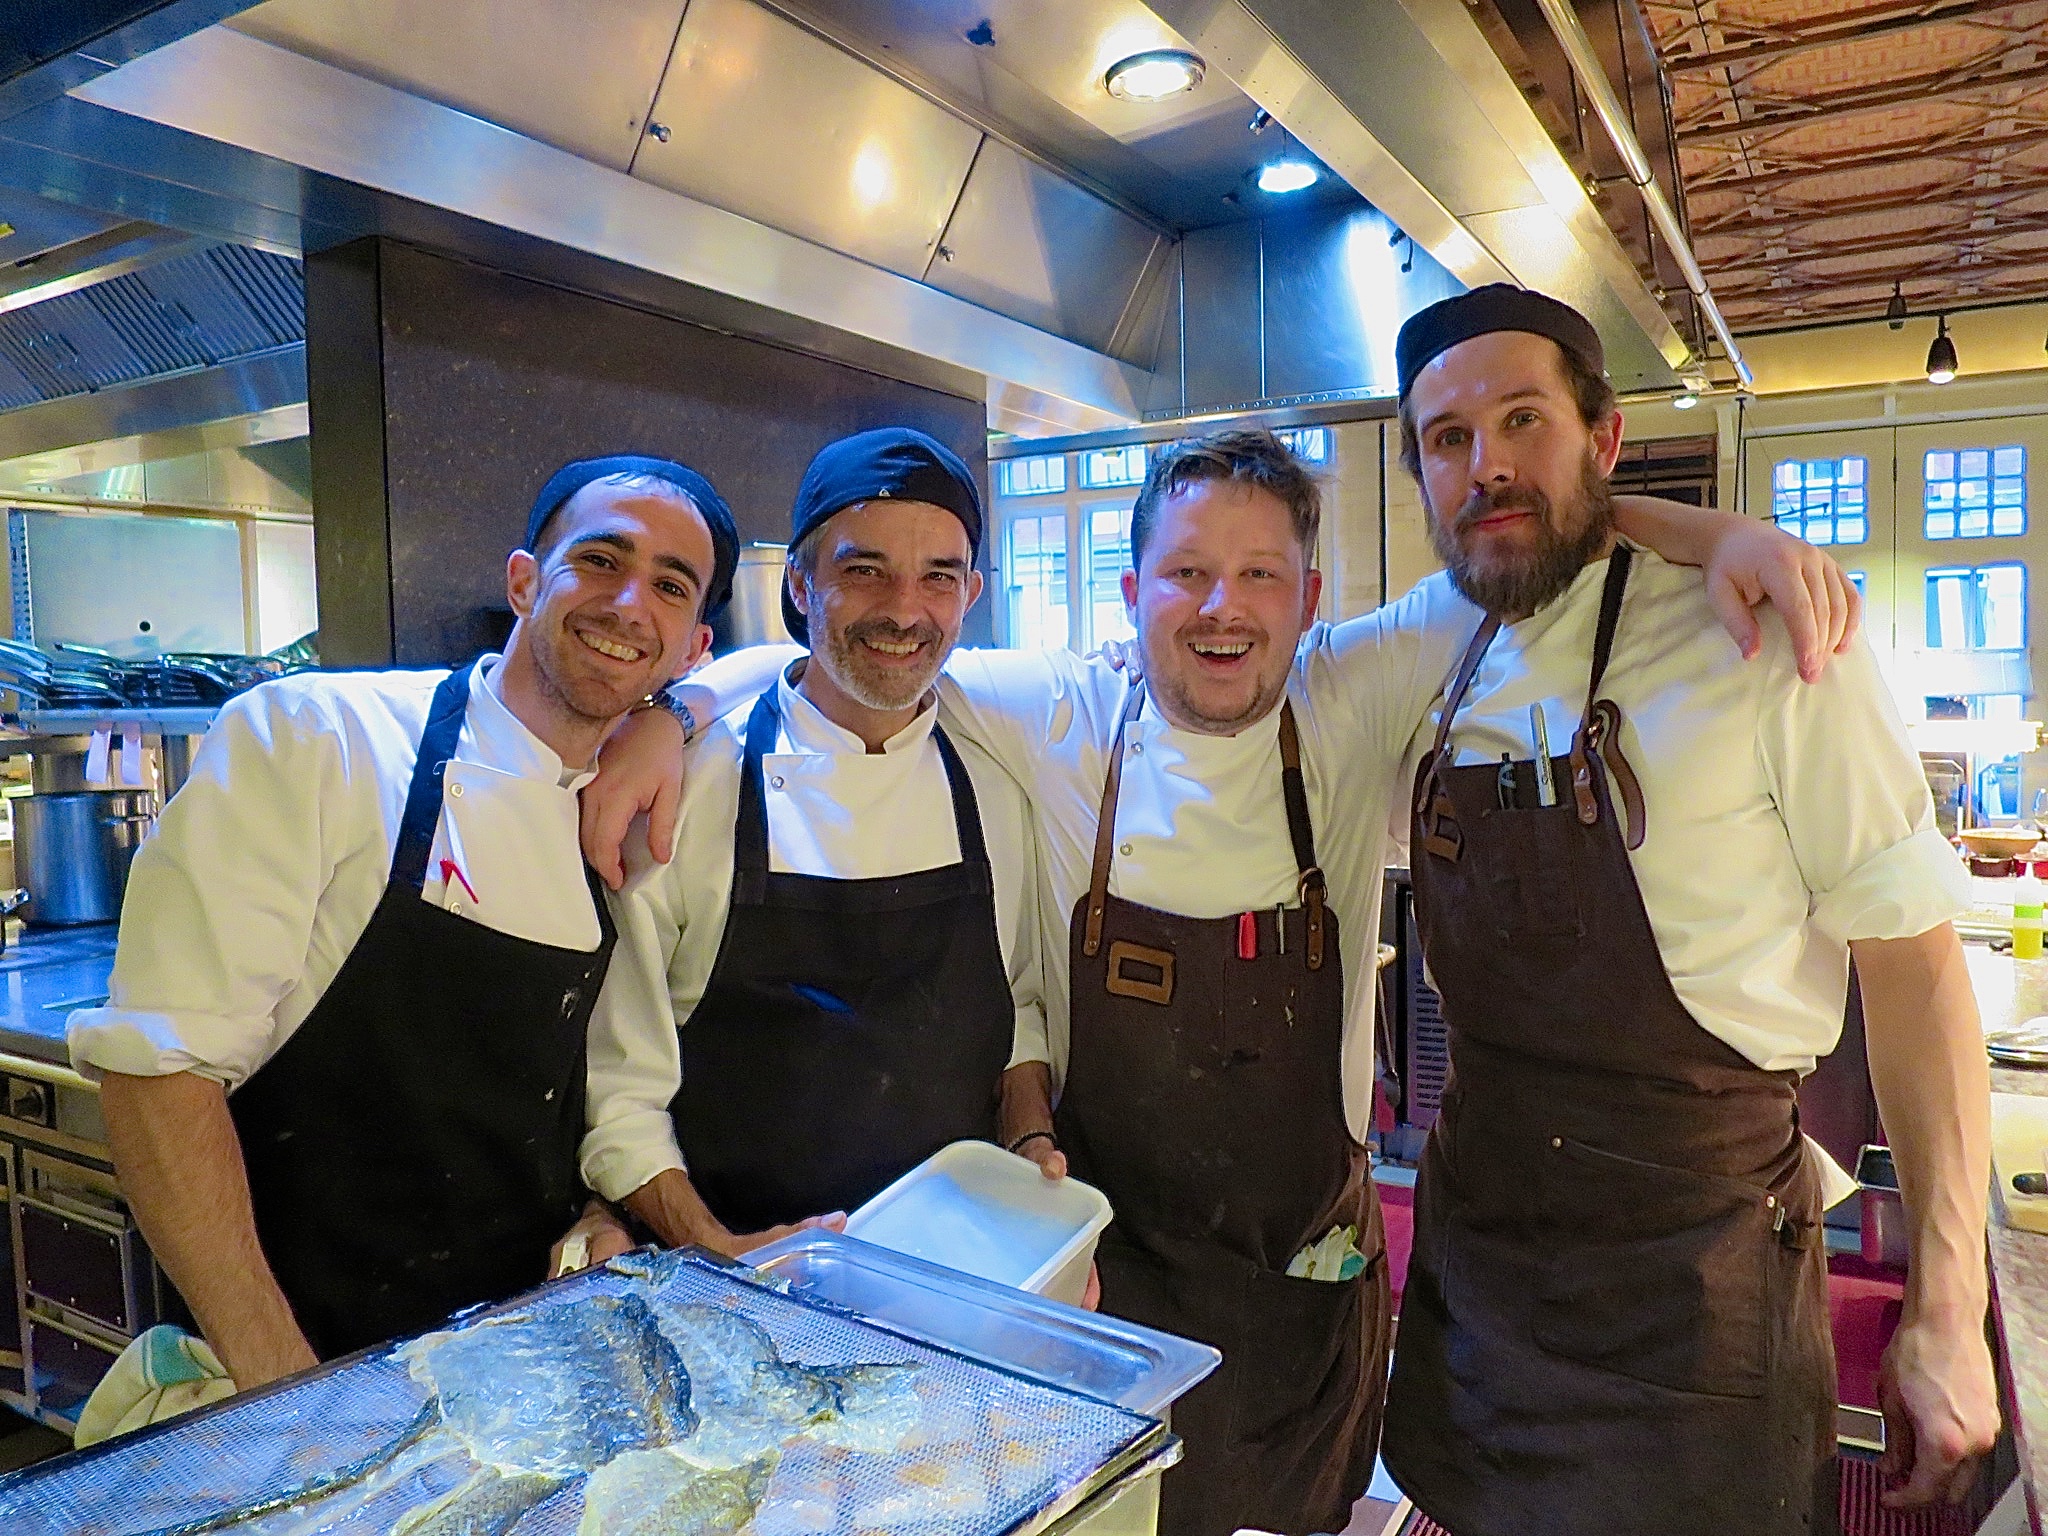 Chefs from Chiltern Firehouse